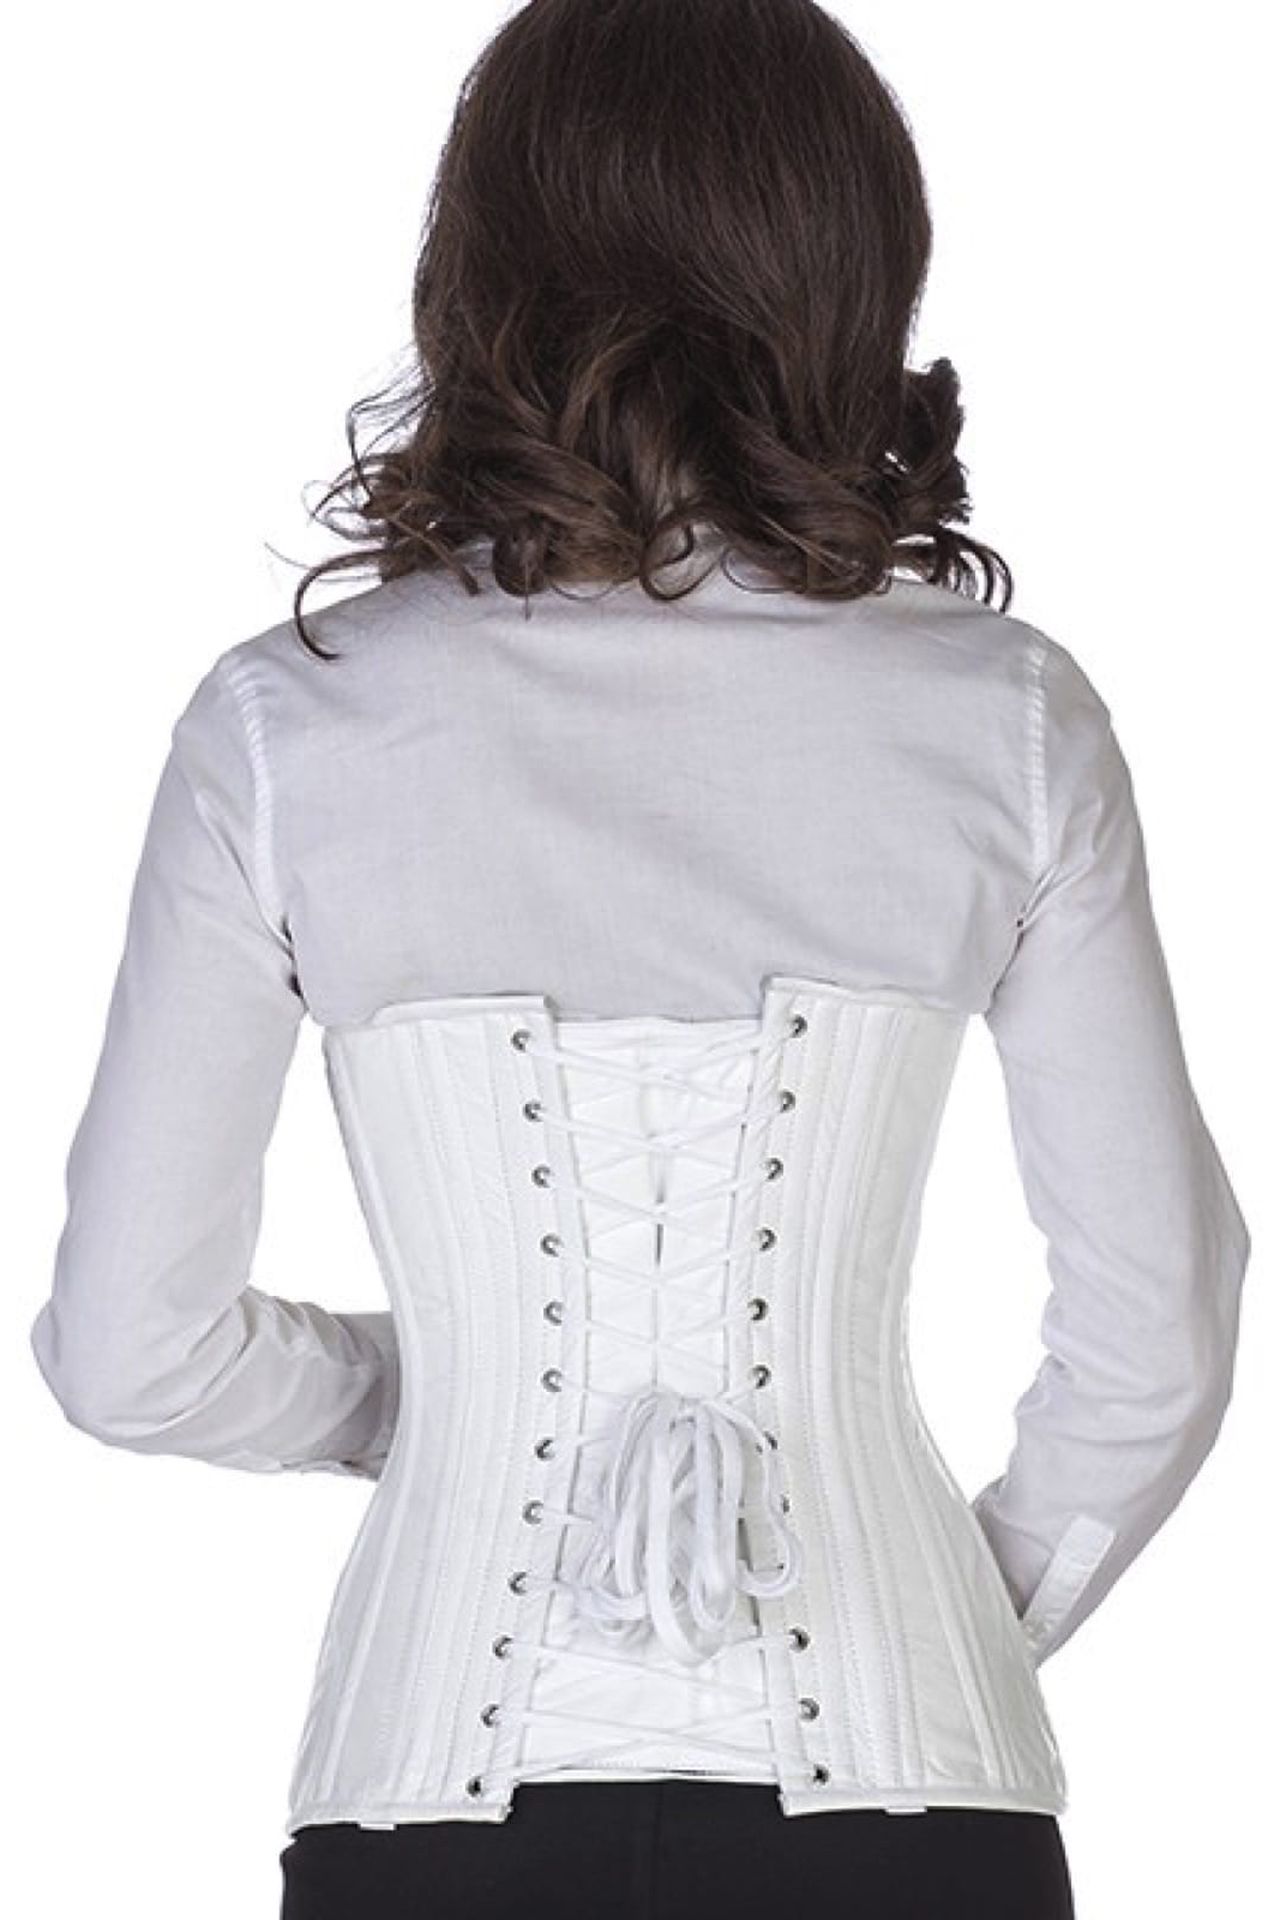 Corset white leather curved underbust ln21